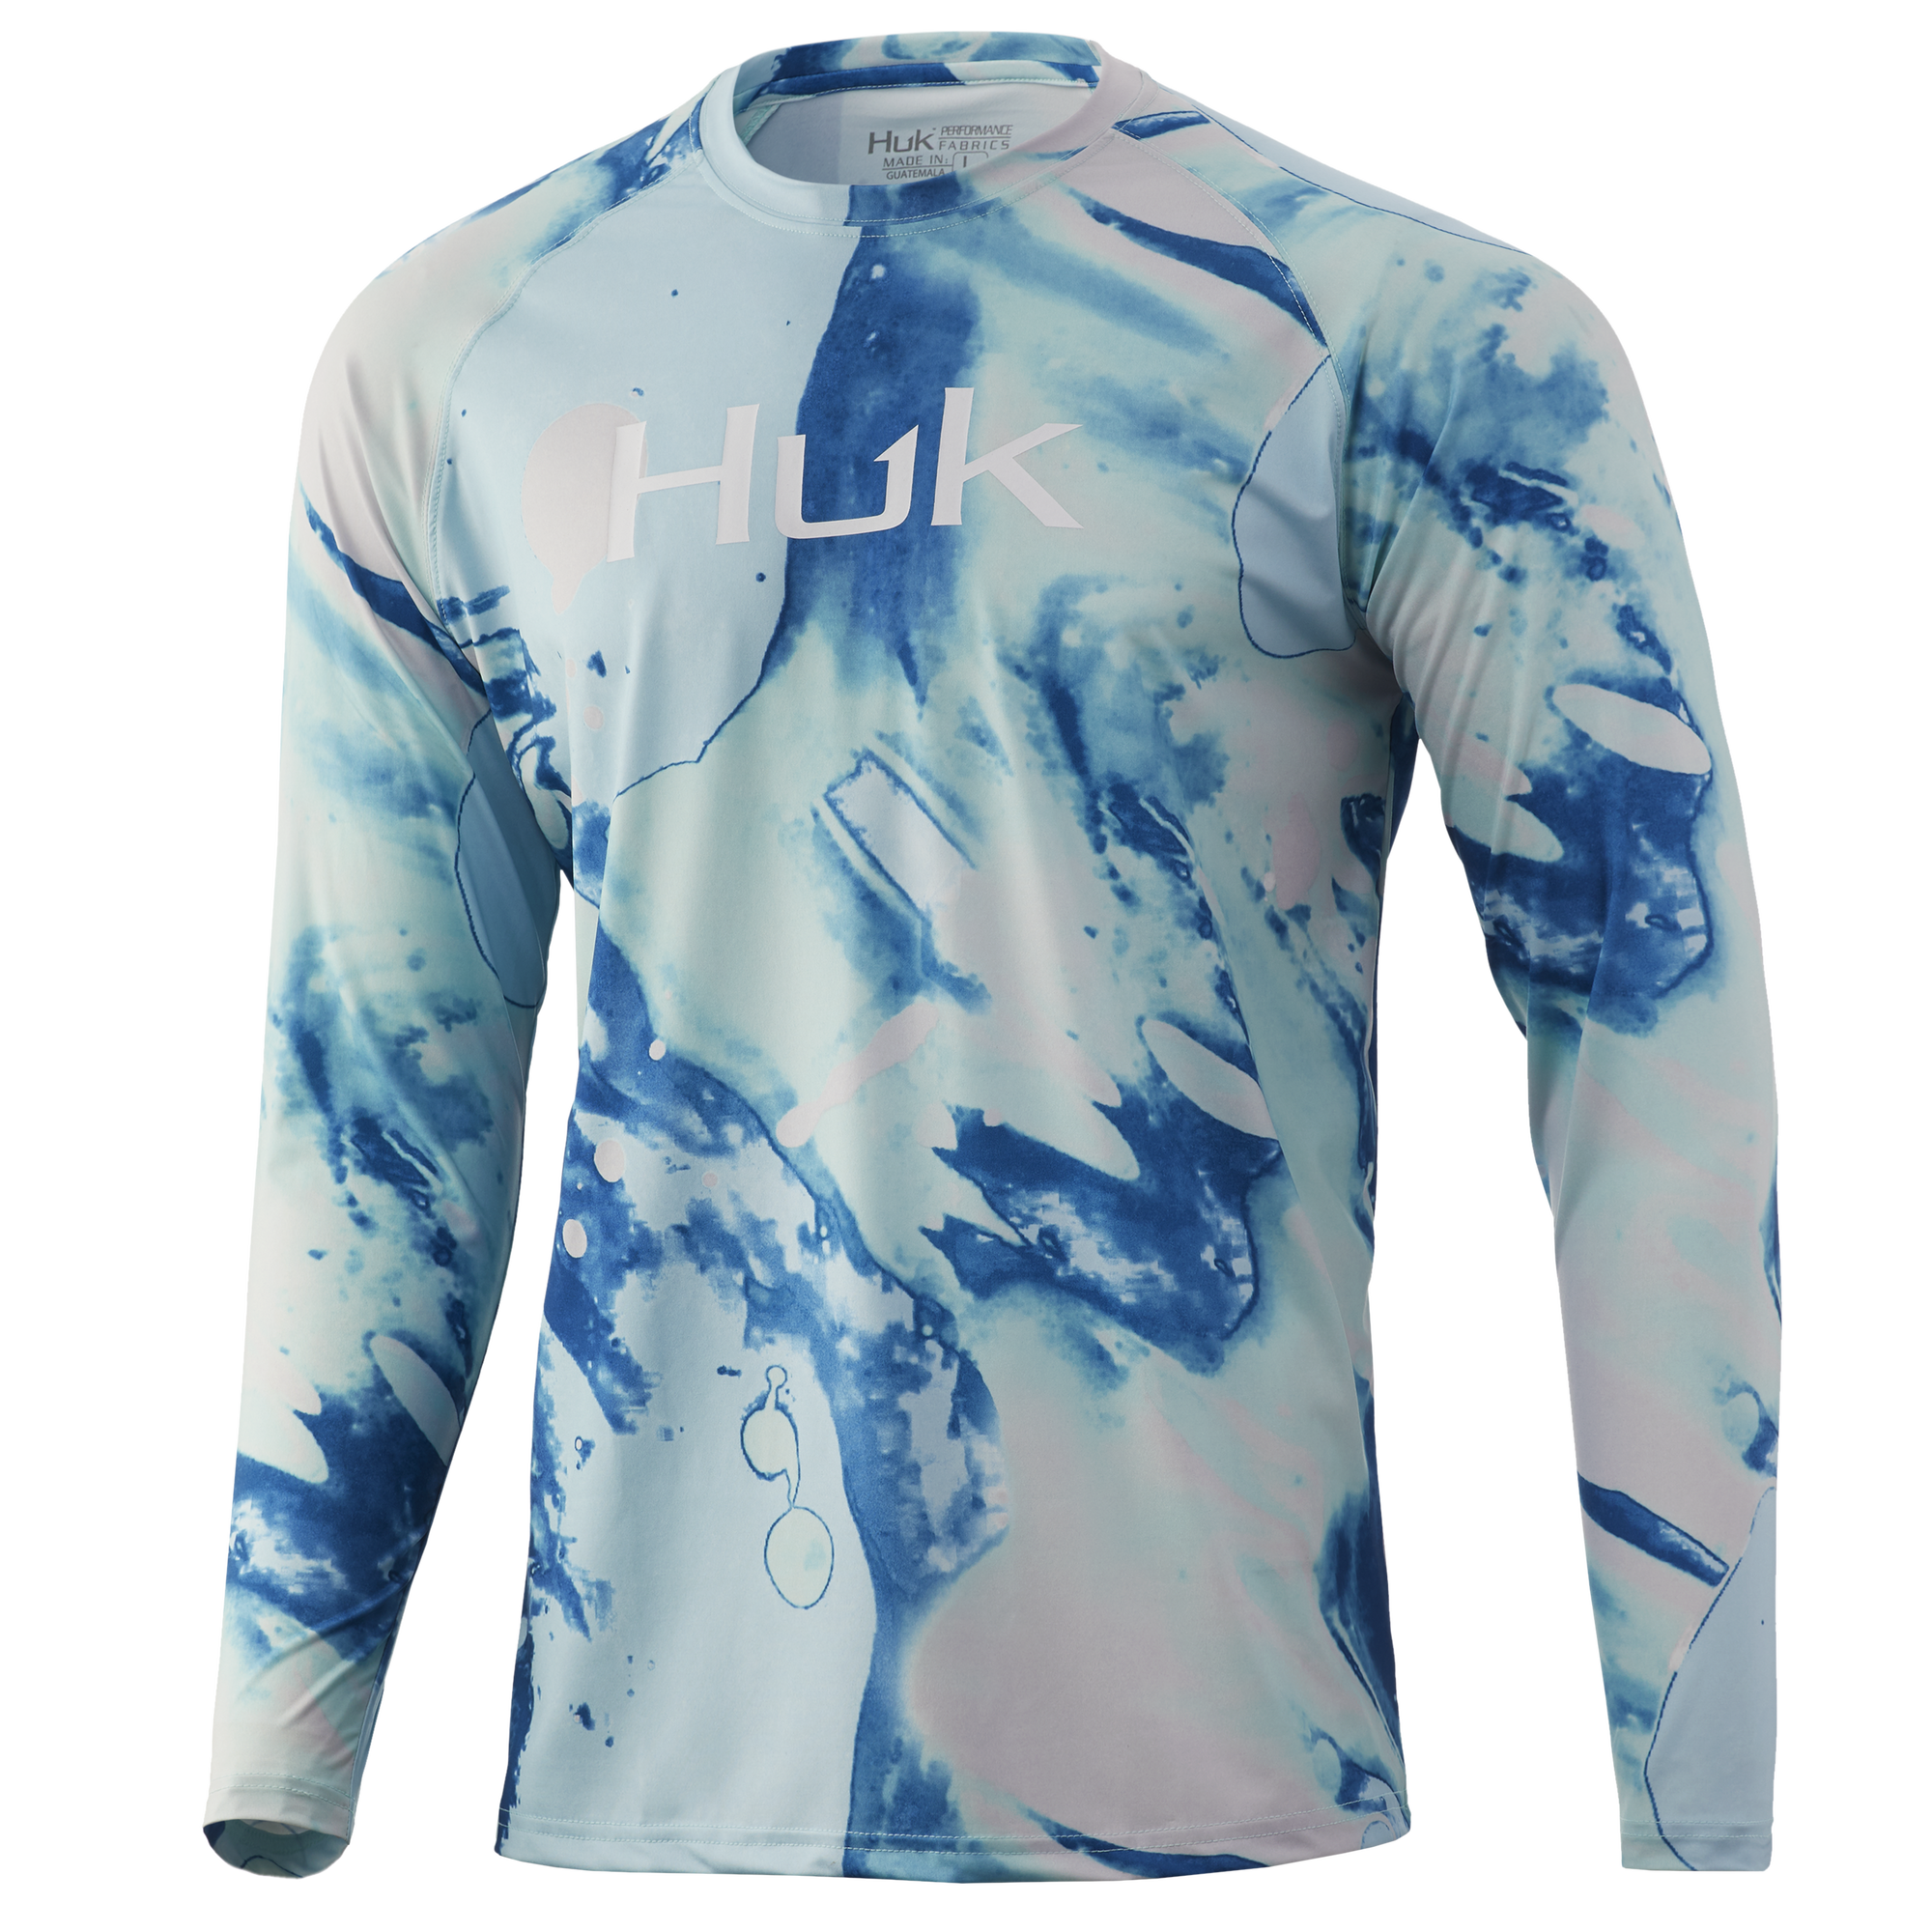 Huk's Tie-Dye Collection Delivers Serious Performance Alongside Plenty of  Fun – Anglers Channel